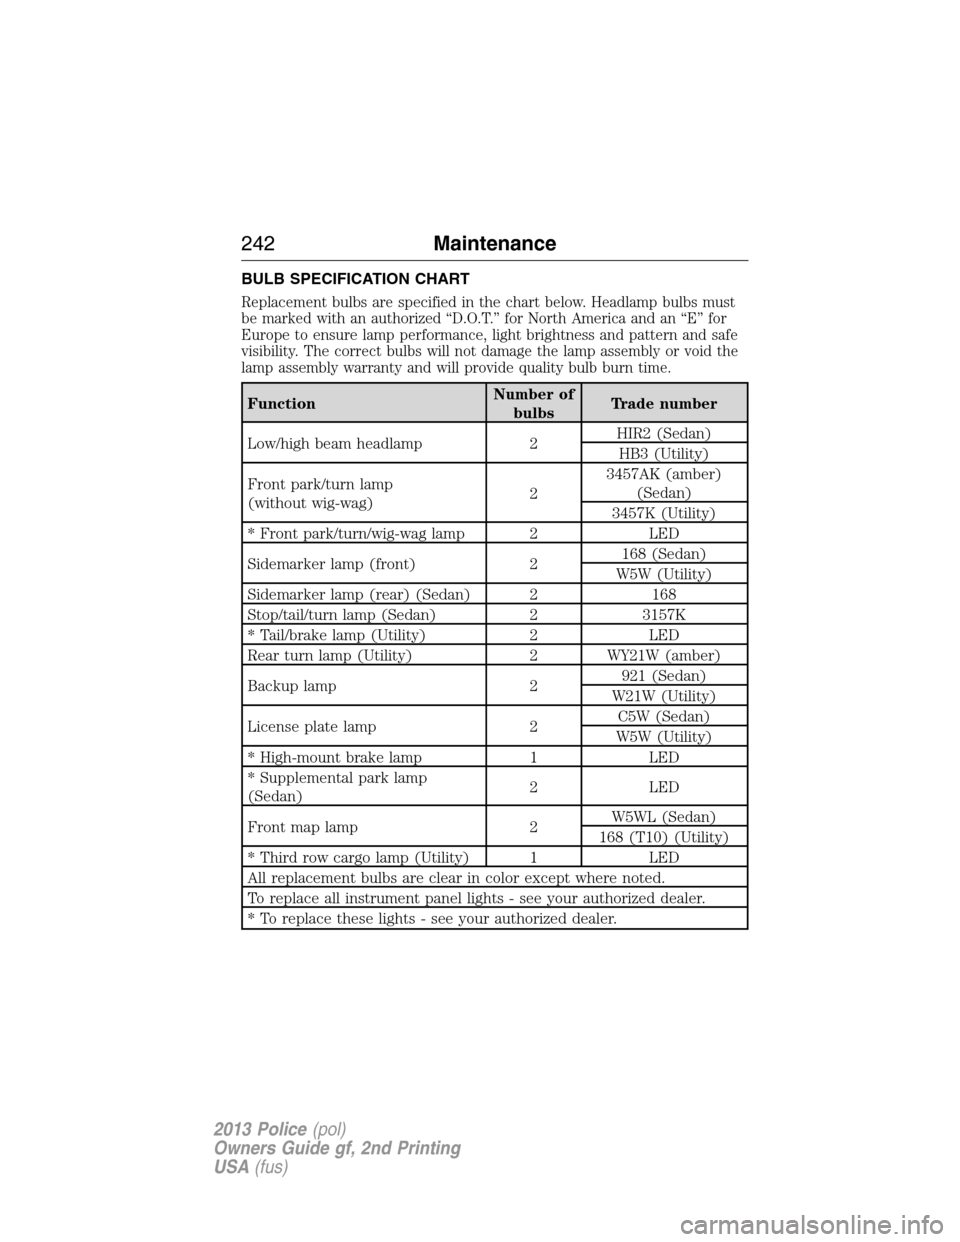 FORD POLICE INTERCEPTOR UTILITY 2013 1.G Owners Manual BULB SPECIFICATION CHART
Replacement bulbs are specified in the chart below. Headlamp bulbs must
be marked with an authorized “D.O.T.” for North America and an “E” for
Europe to ensure lamp pe